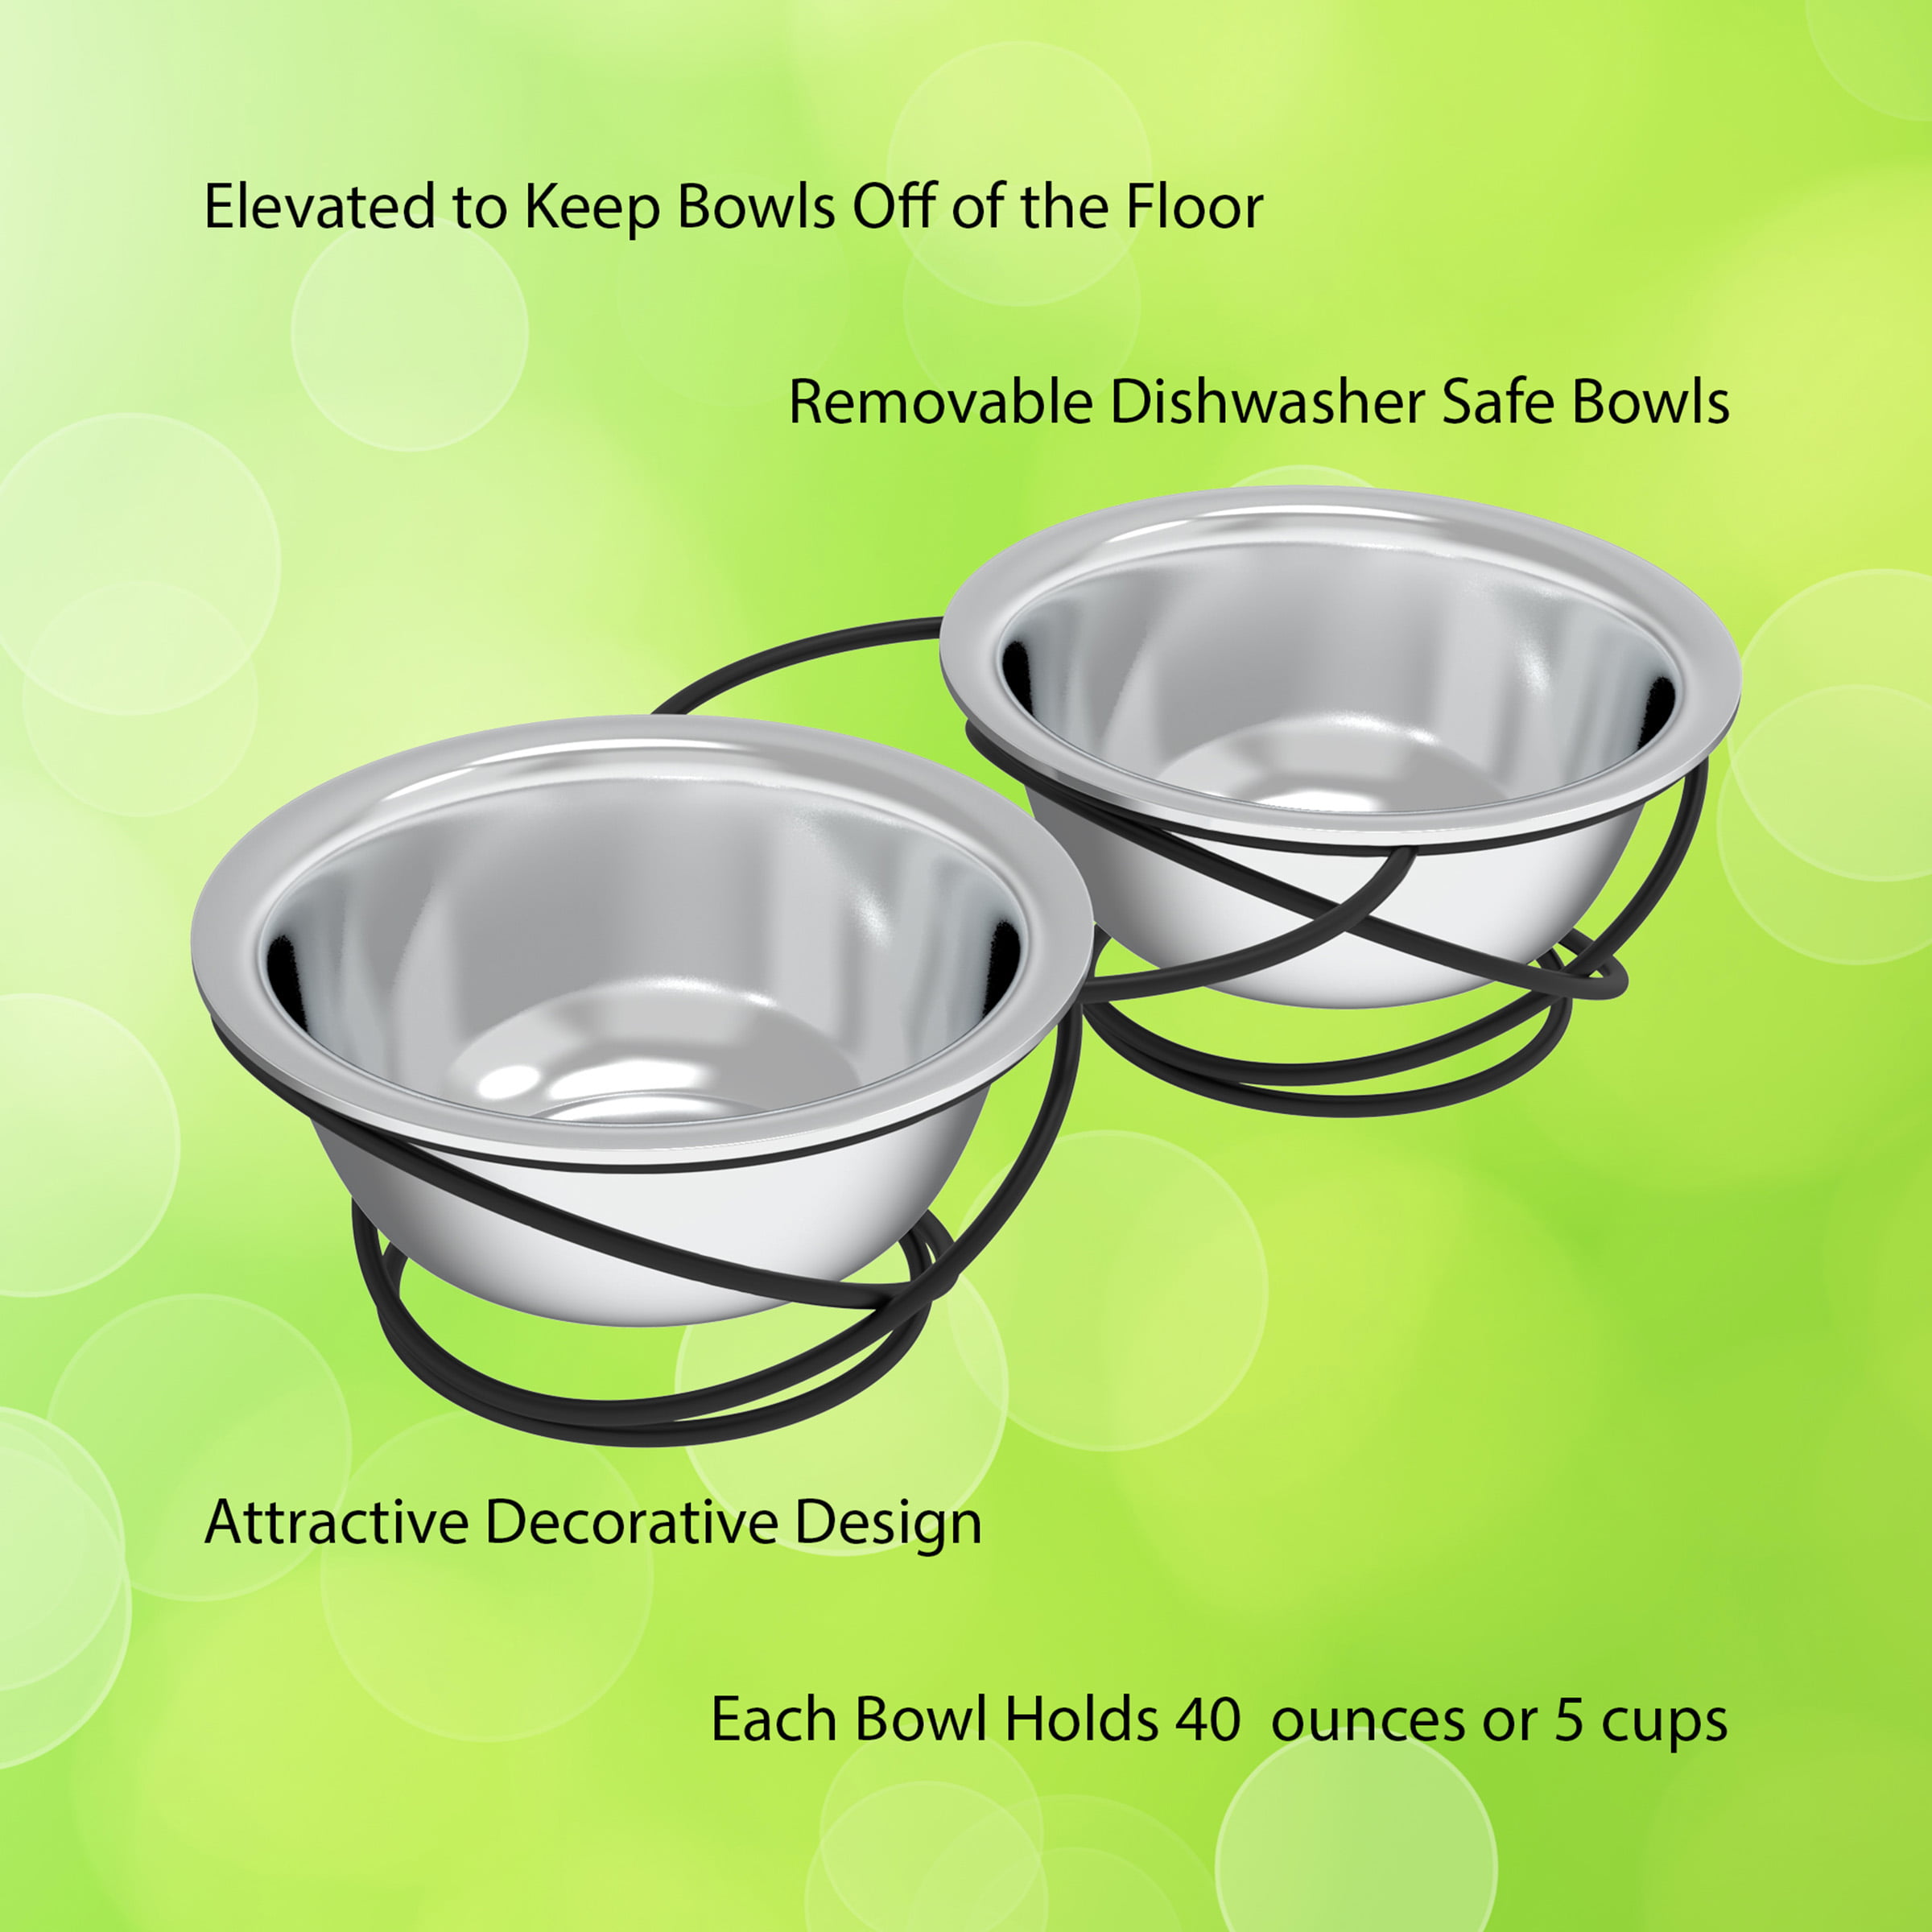 Wantryapet WANTRYAPET Elevated Dog Bowls 6 Heights Adjustable Raise Dog  Bowls Double Large Food Water Bowls Raise Pet Bowls Stand for Small